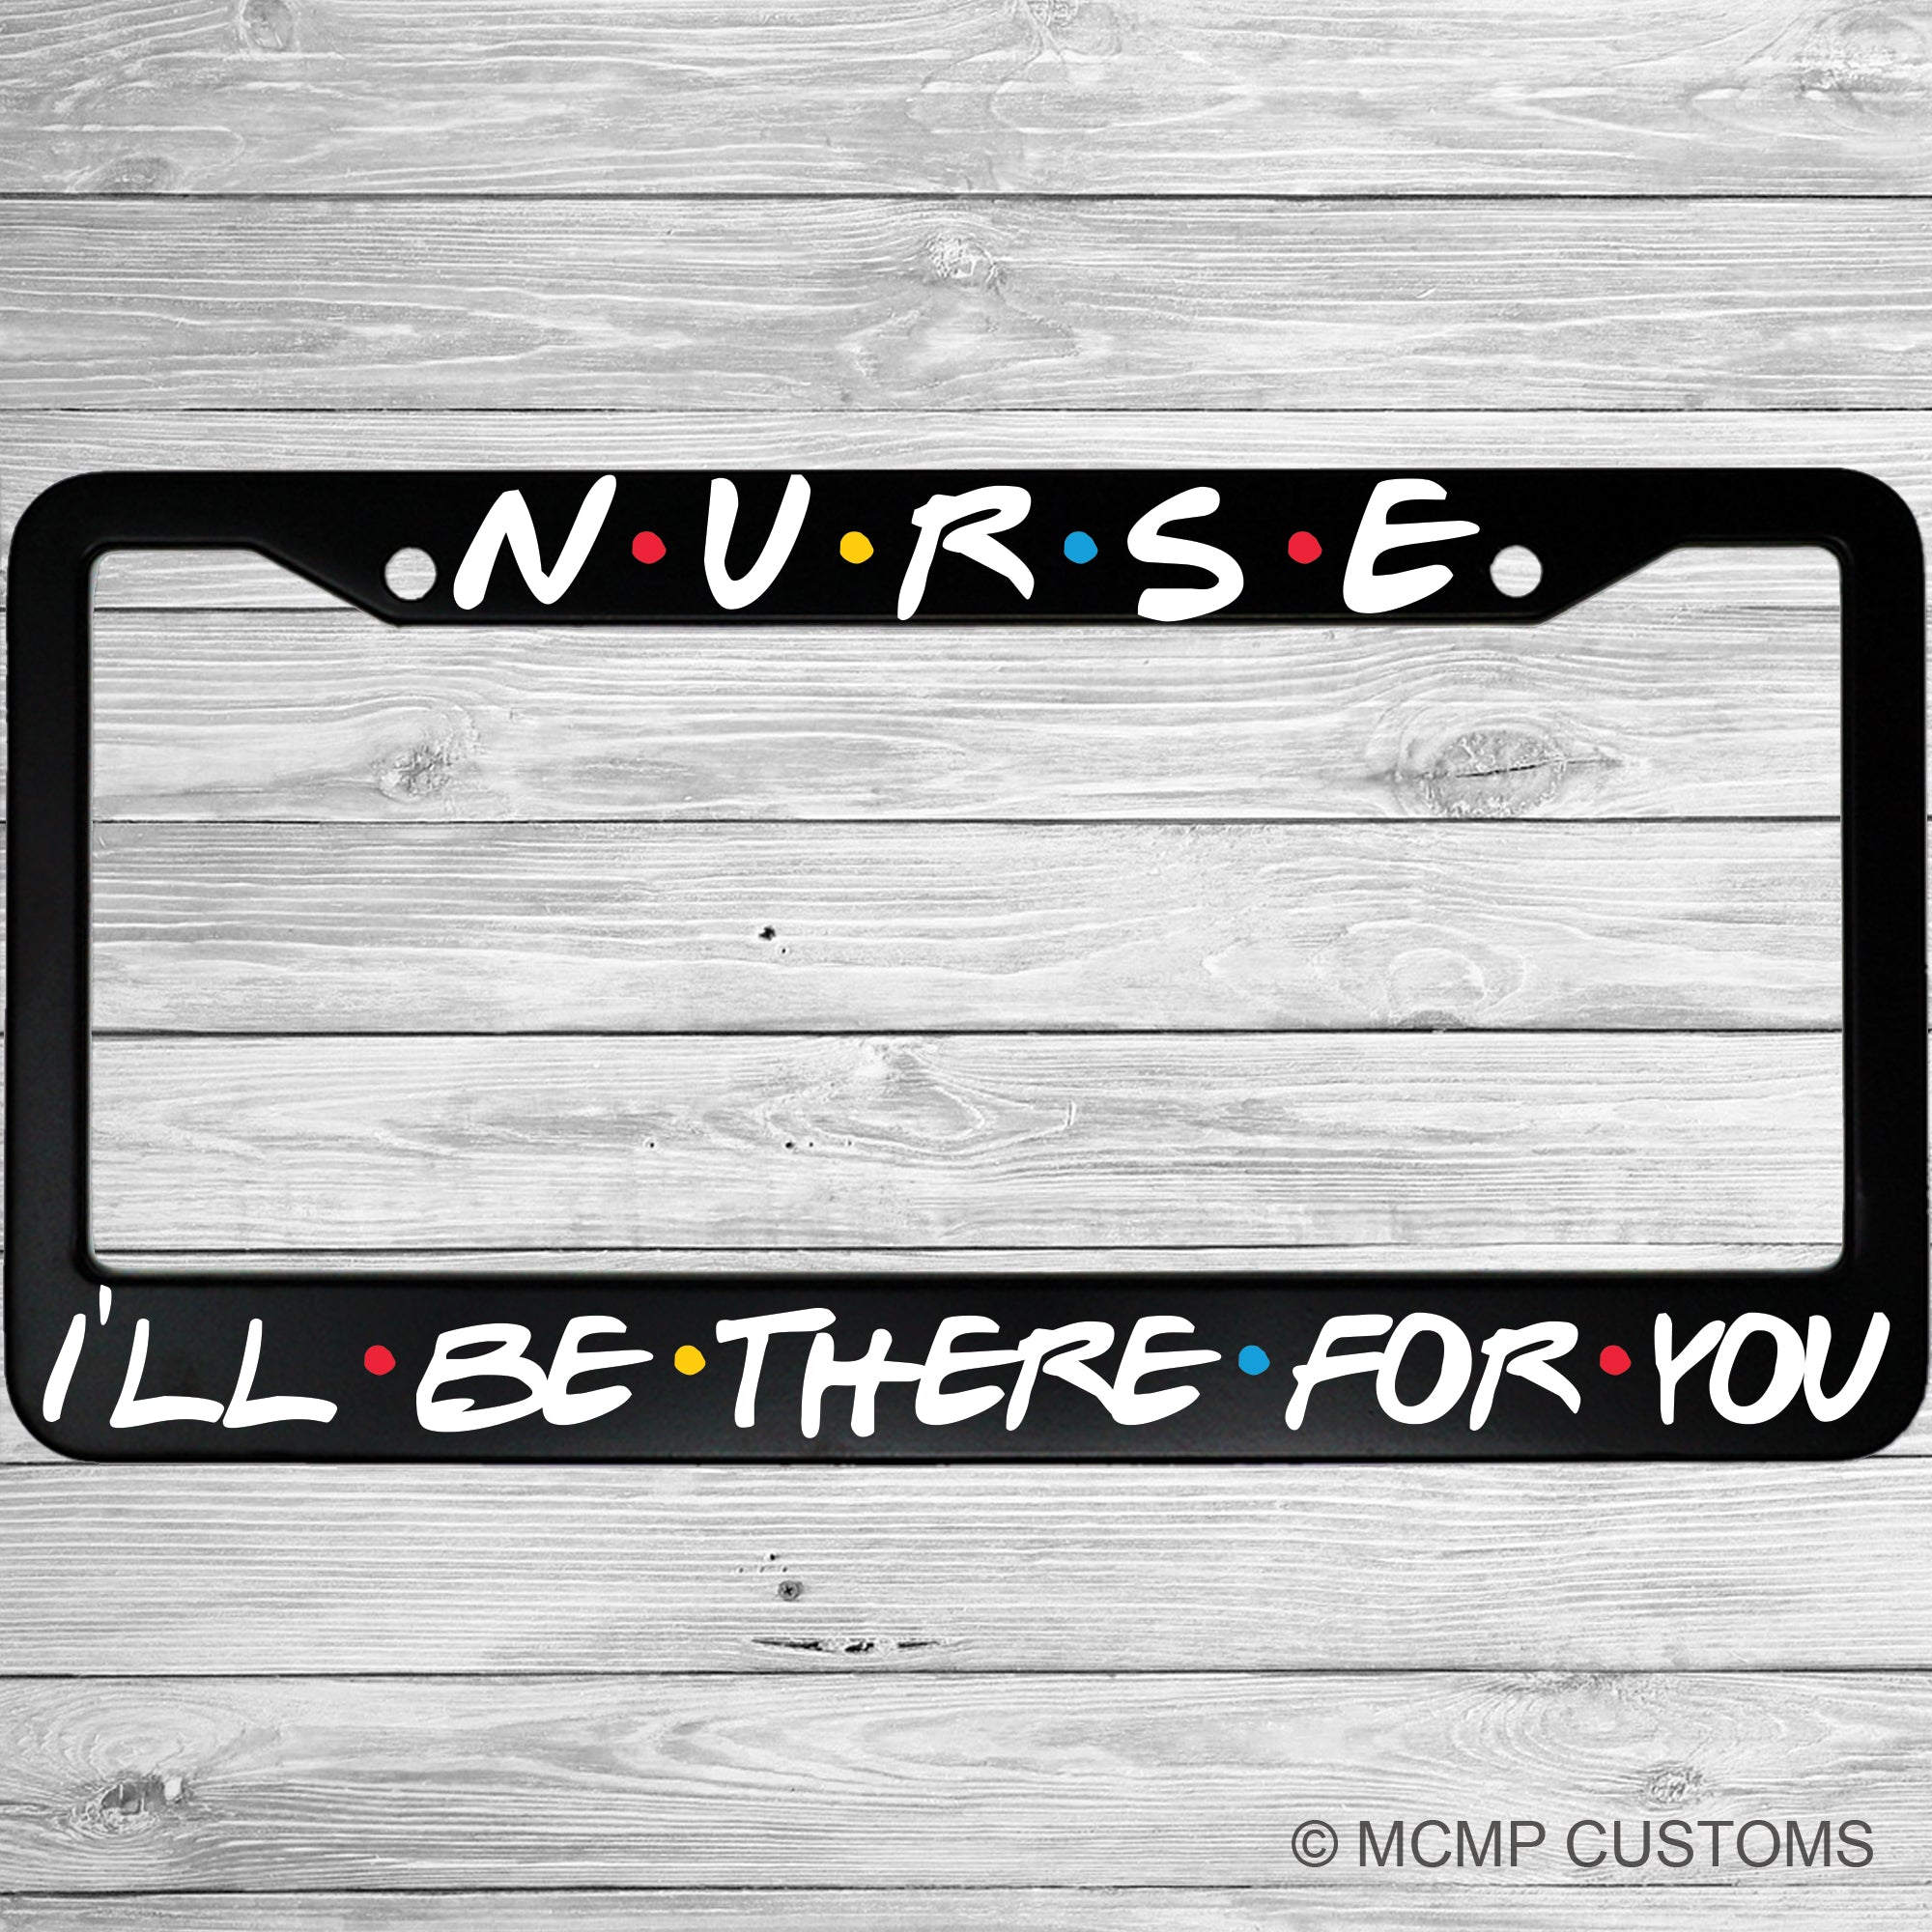 Nurse I'll Be There For You